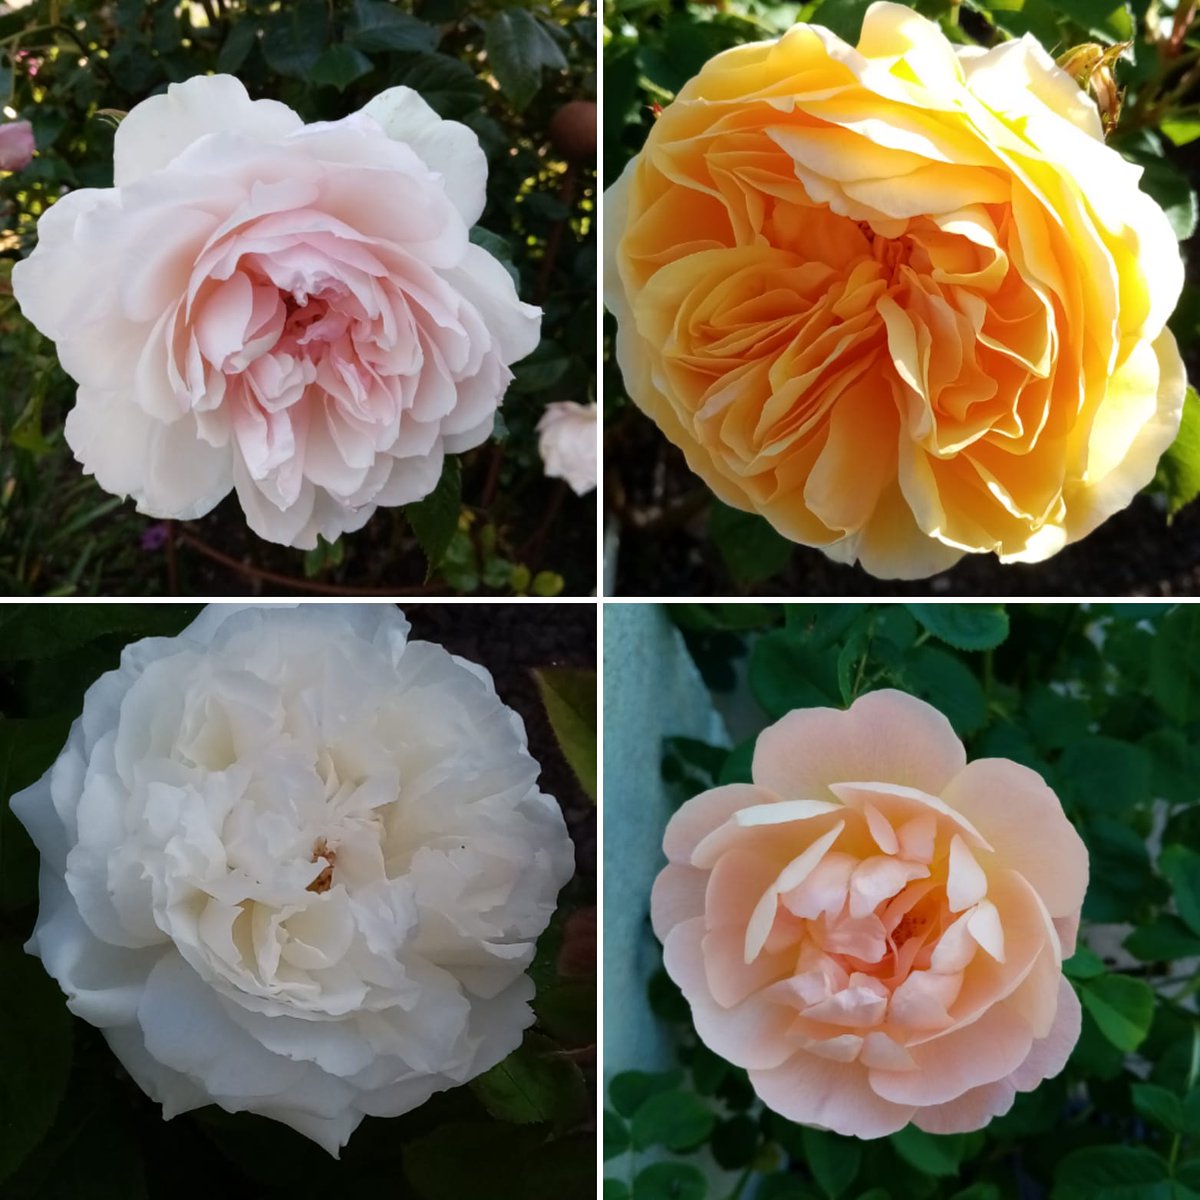 A selection of roses from the garden today for you: 'Generous Gardener', 'Graham Thomas', 'Winchester Cathedral' and 'The Lark Ascending'

#plants #plantfair #specialistnurseries #gardens #opengardens #roses #somerset